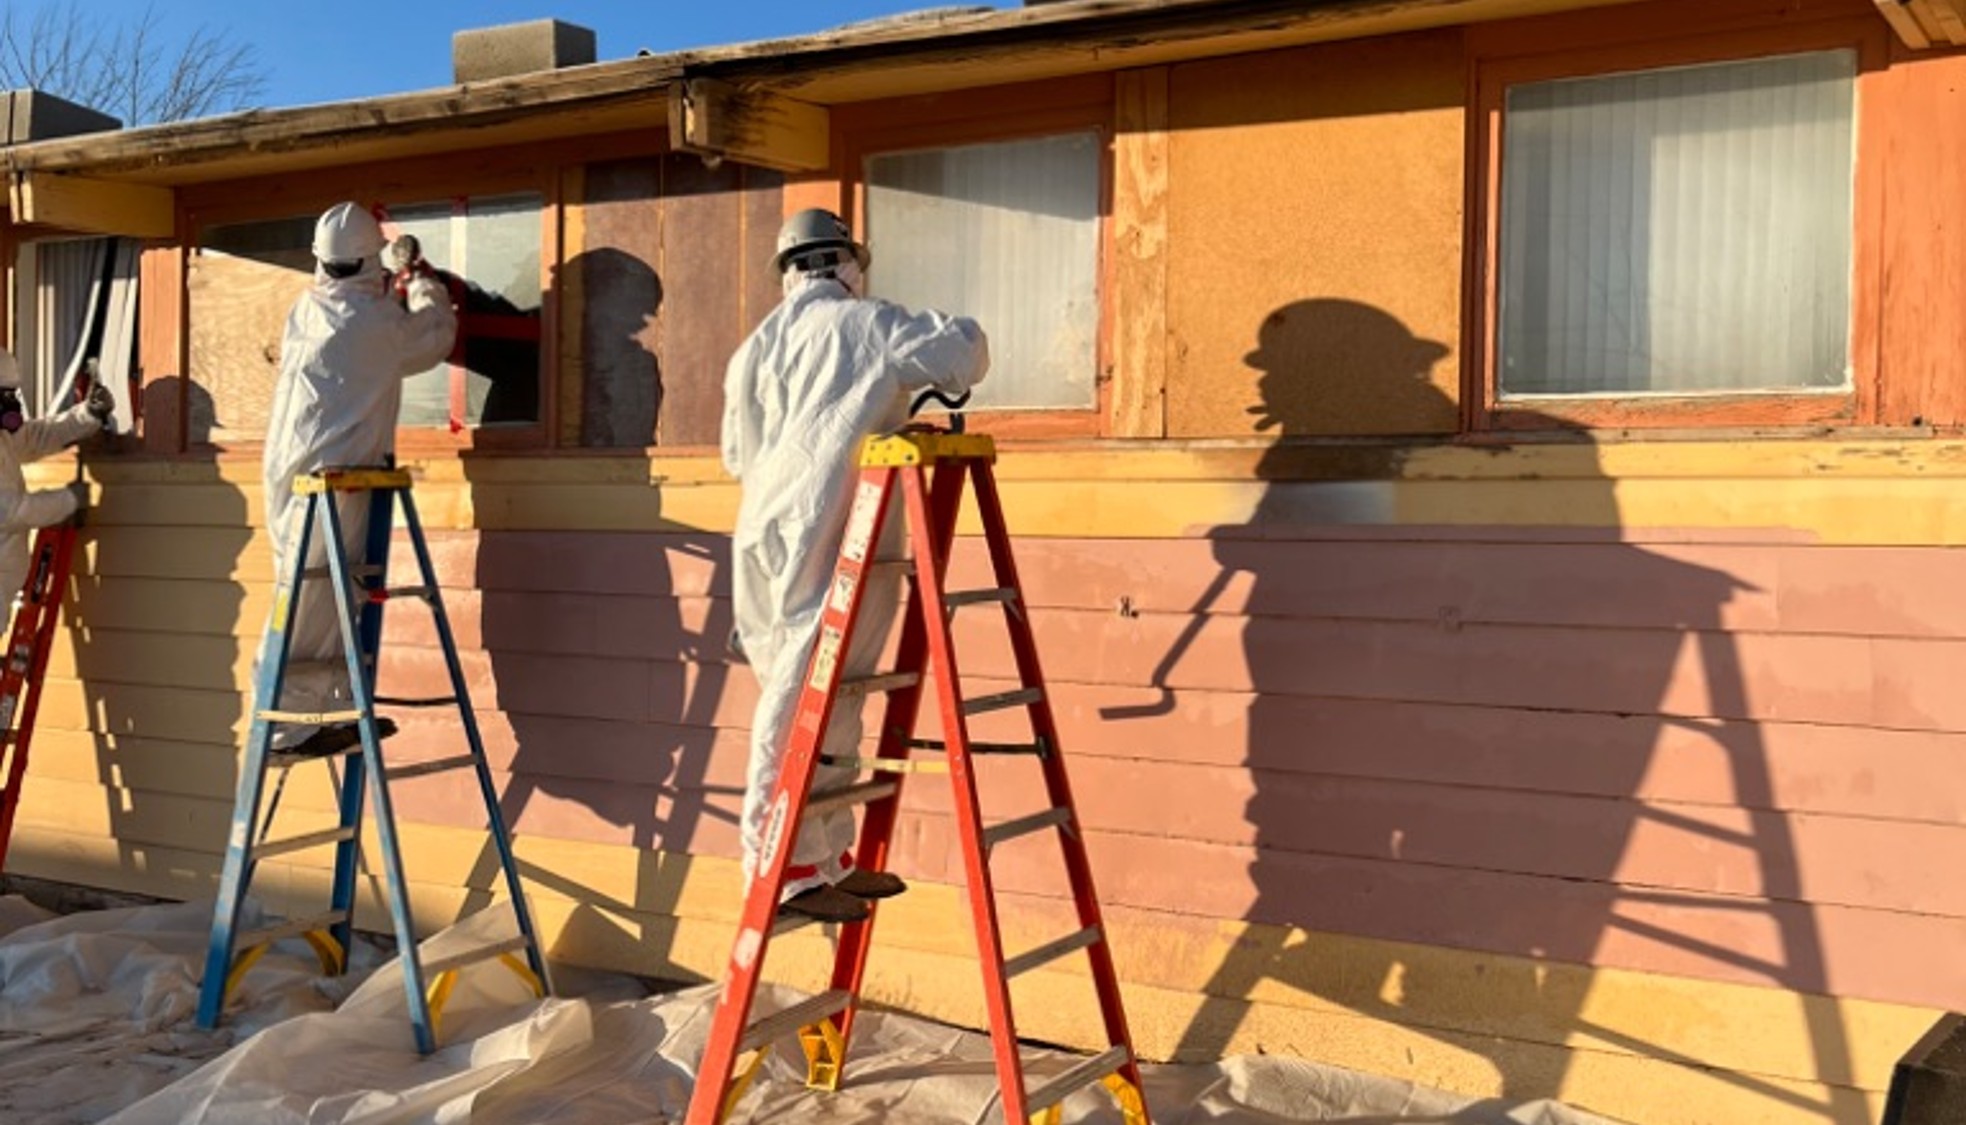 Workers remove the windows of a dormitory in the Navajo region